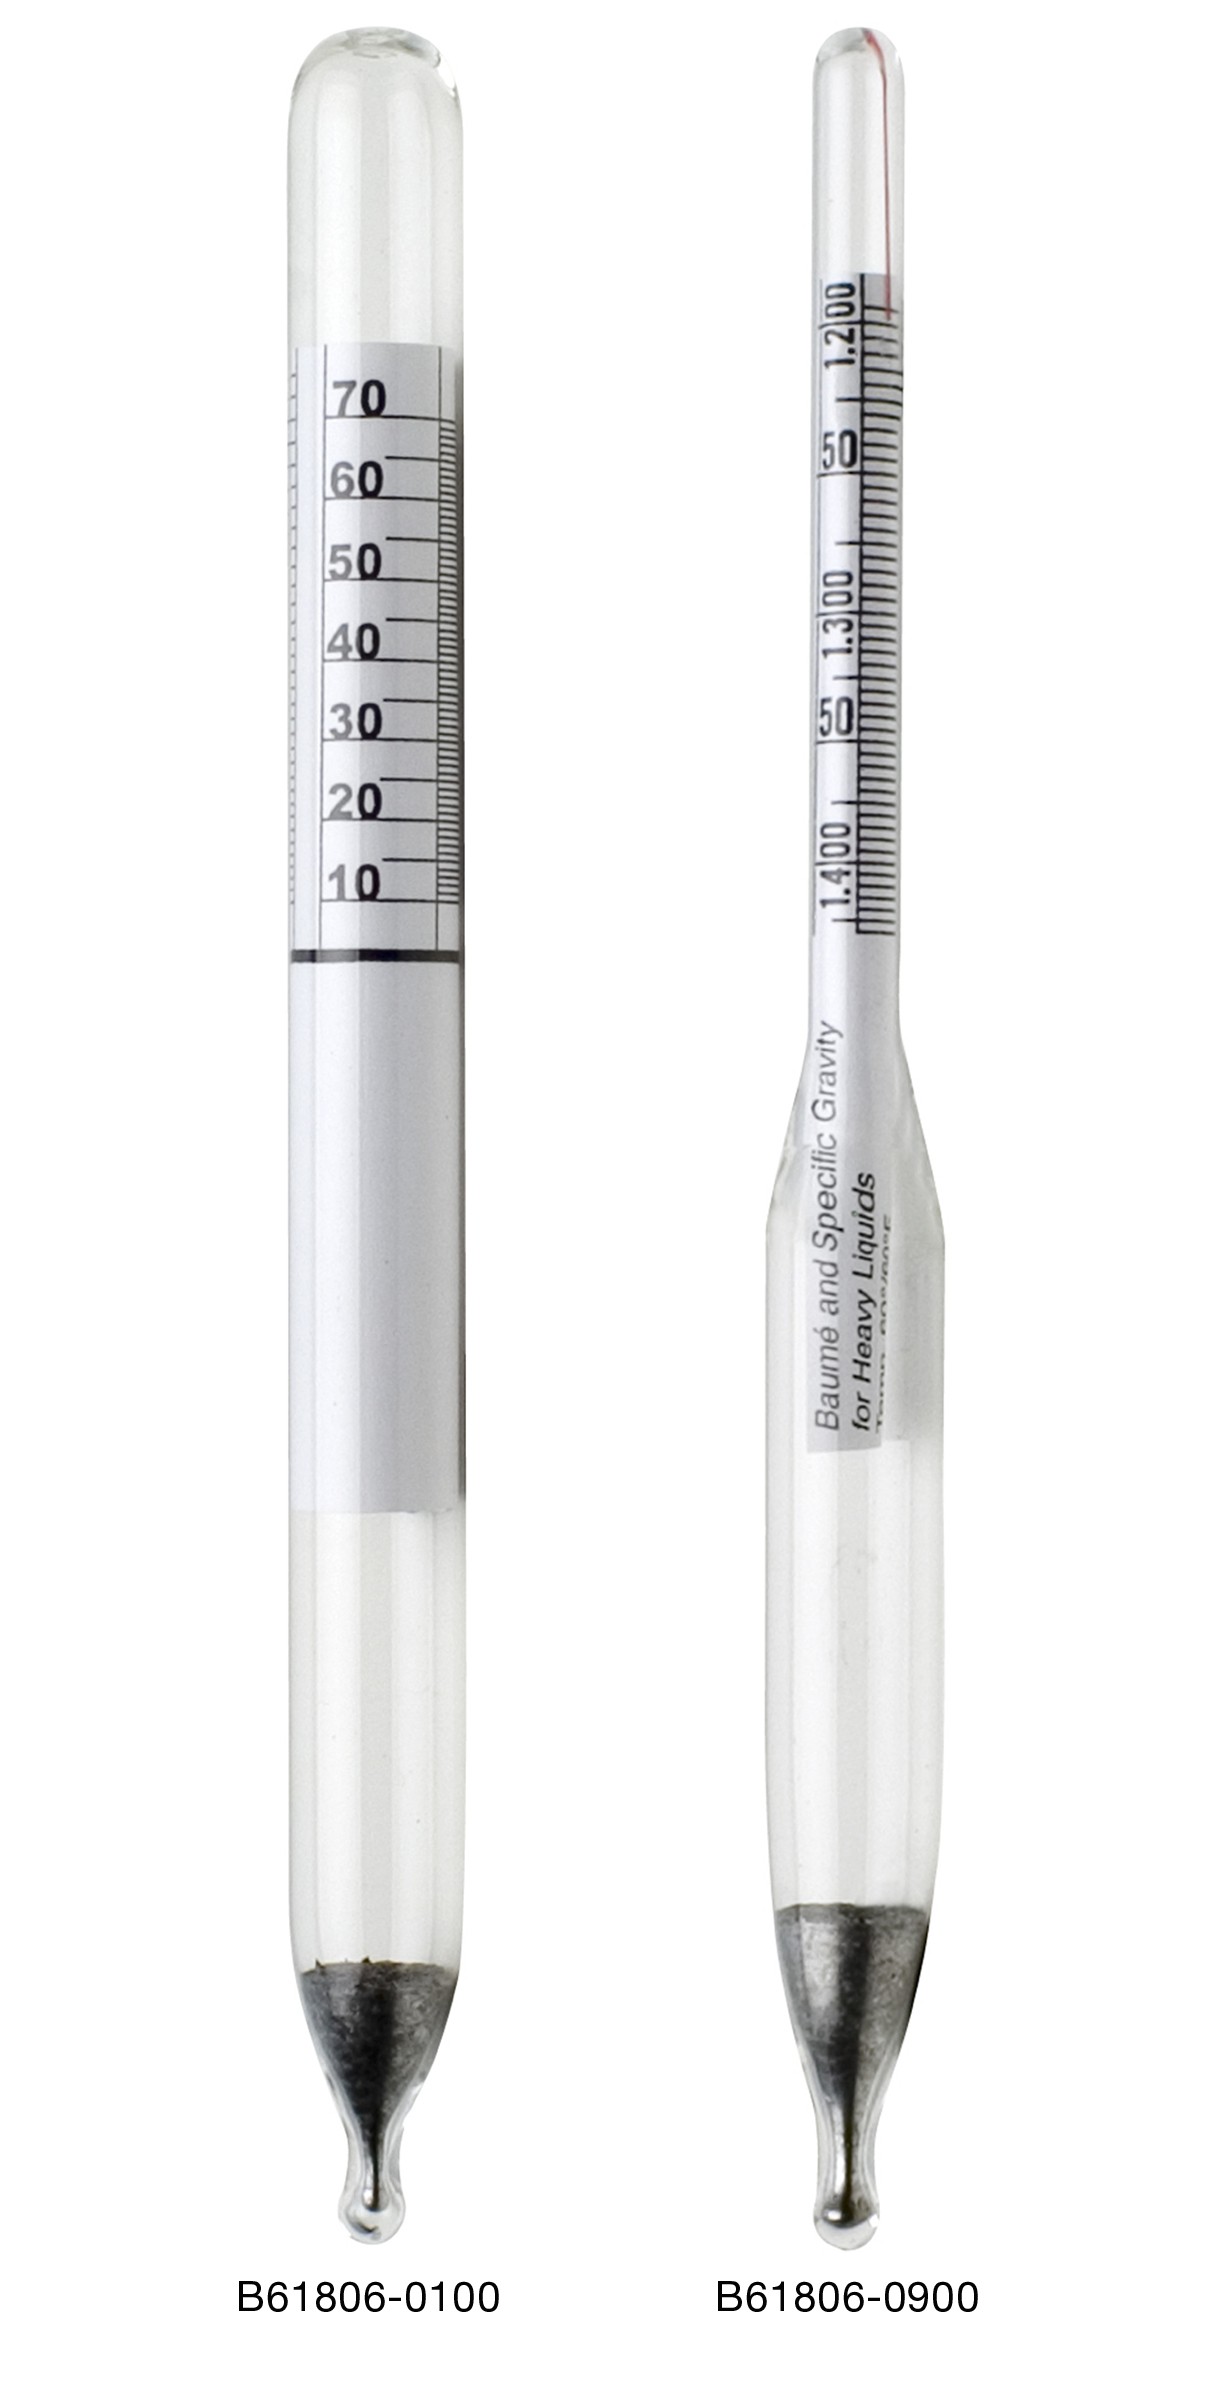 H-B DURAC Specific Gravity / Relative Density (g/cmᶟ) & Baume Plain Form Hydrometers; Traceable to NIST